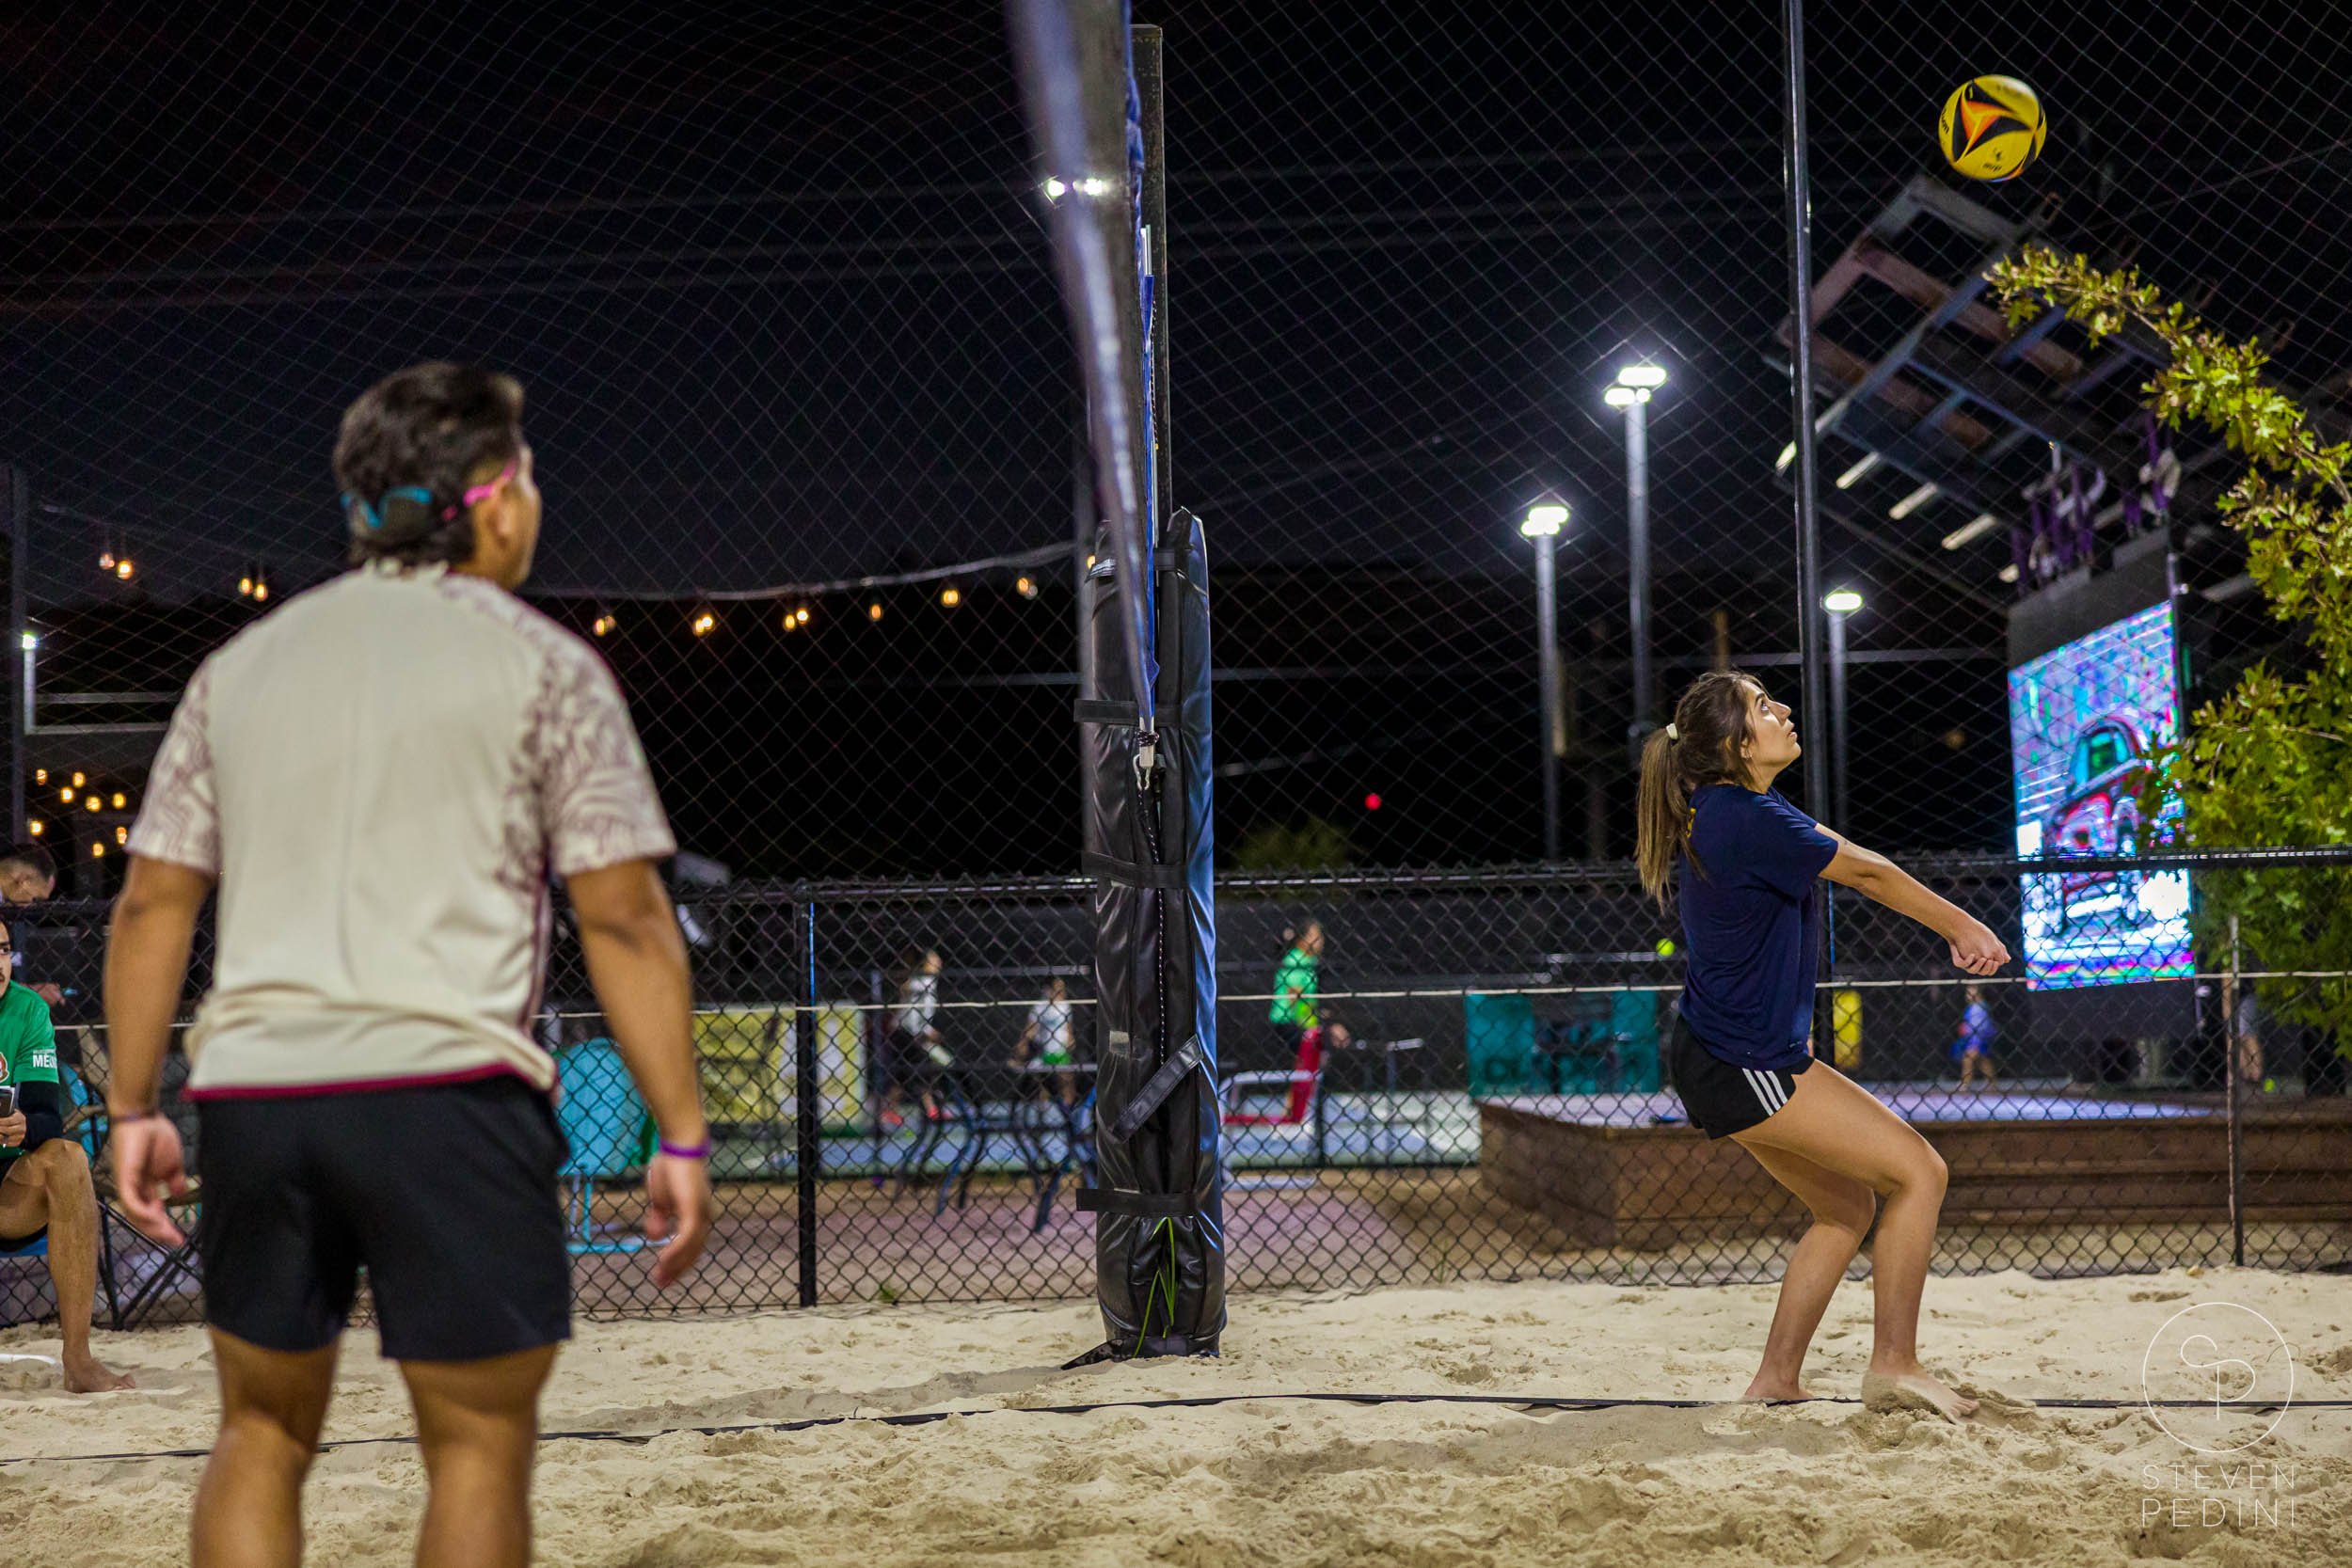 Steven Pedini Photography - Bumpy Pickle - Sand Volleyball - Houston TX - World Cup of Volleyball - 00389.jpg